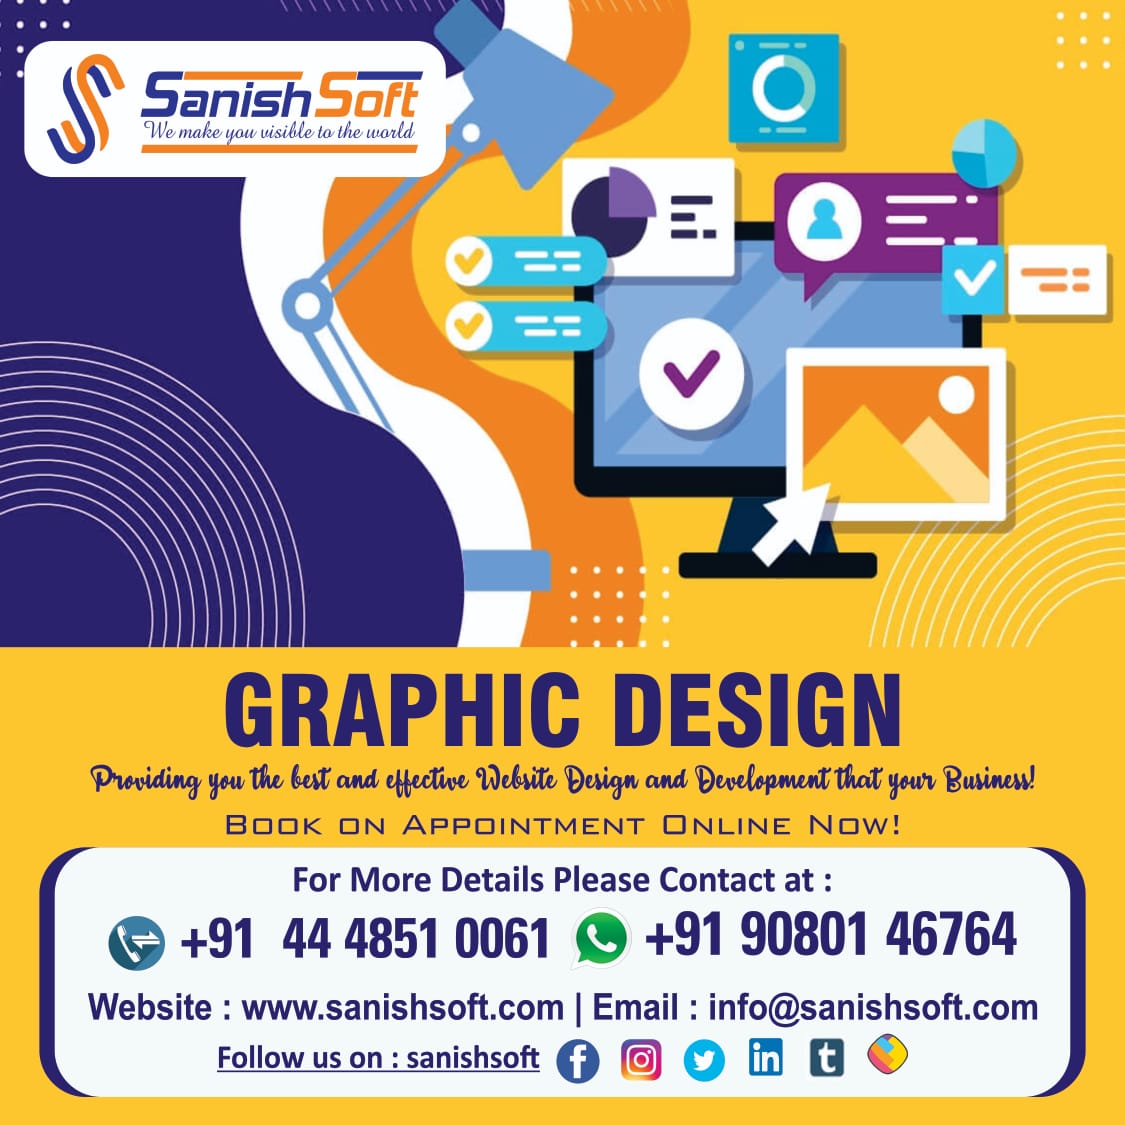 Do you want the best Web Service for your business growth?

Types of Grphic Design
☀Visual Identity
☀Marketing
☀Advertising
☀User Interface
☀Motion Graphic

CALL 
📞 90801 46764

#mobileapp #mobileappdevelopmentcompany #sale #design #news #BreakingNews #today #web #app